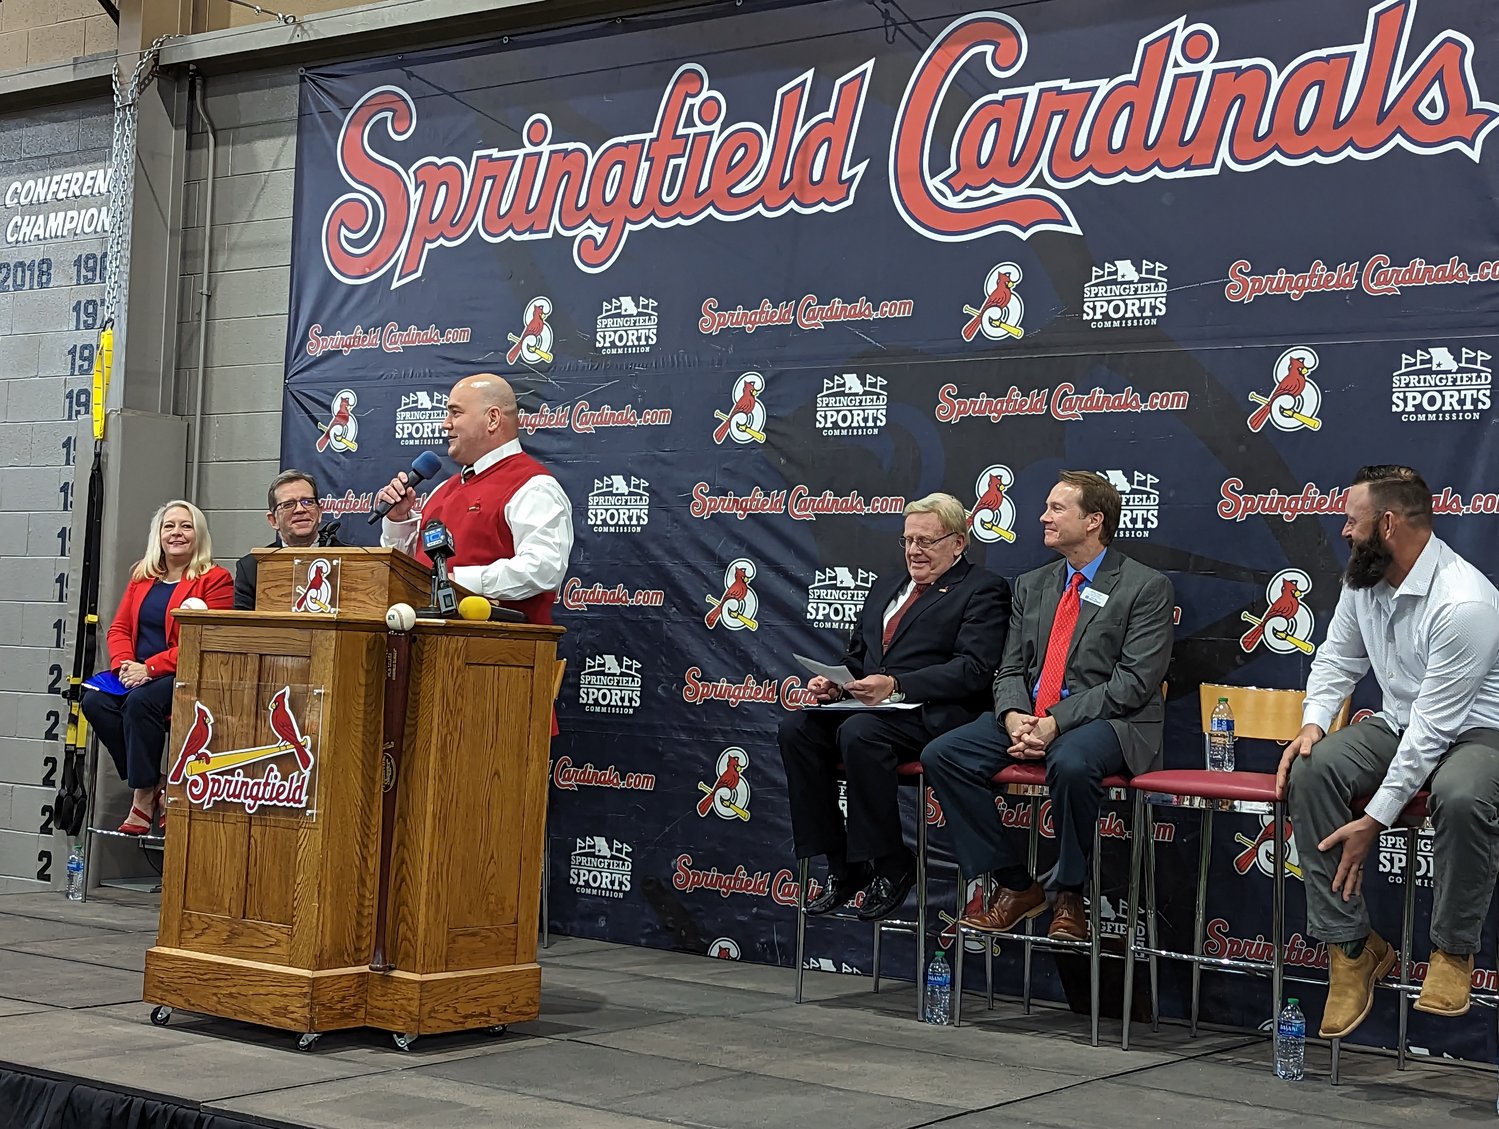 Springfield Cardinals General Manager Dan Reiter says the team is excited to collaborate with the city.